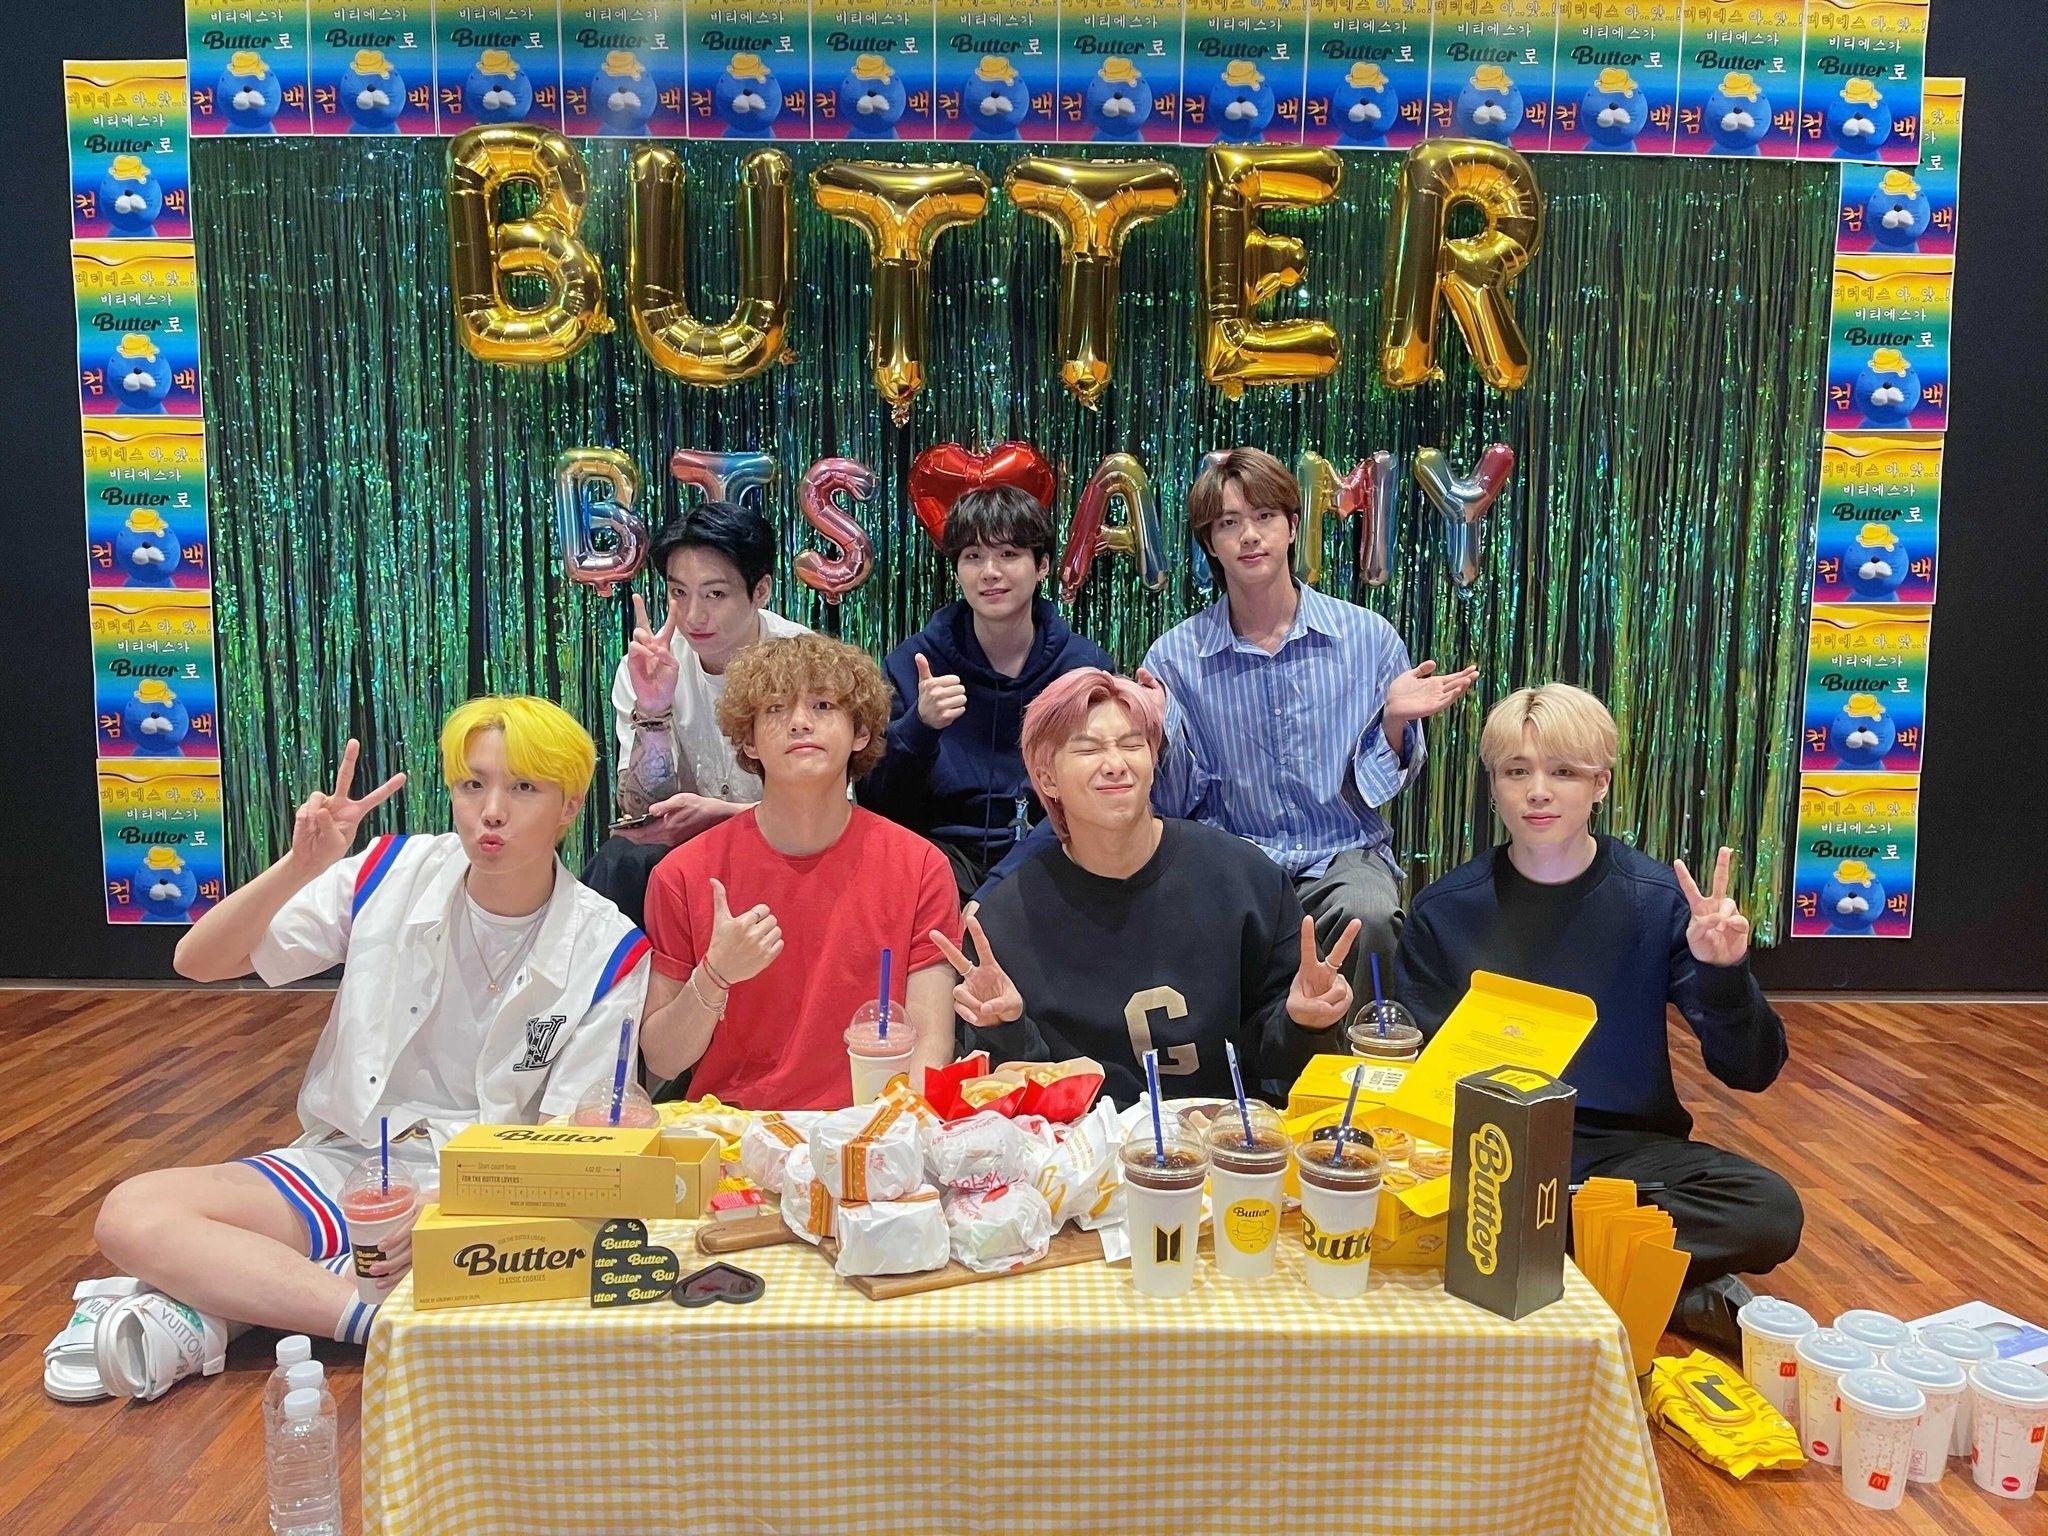 Interview: BTS On Butter And Making Music With A Legacy